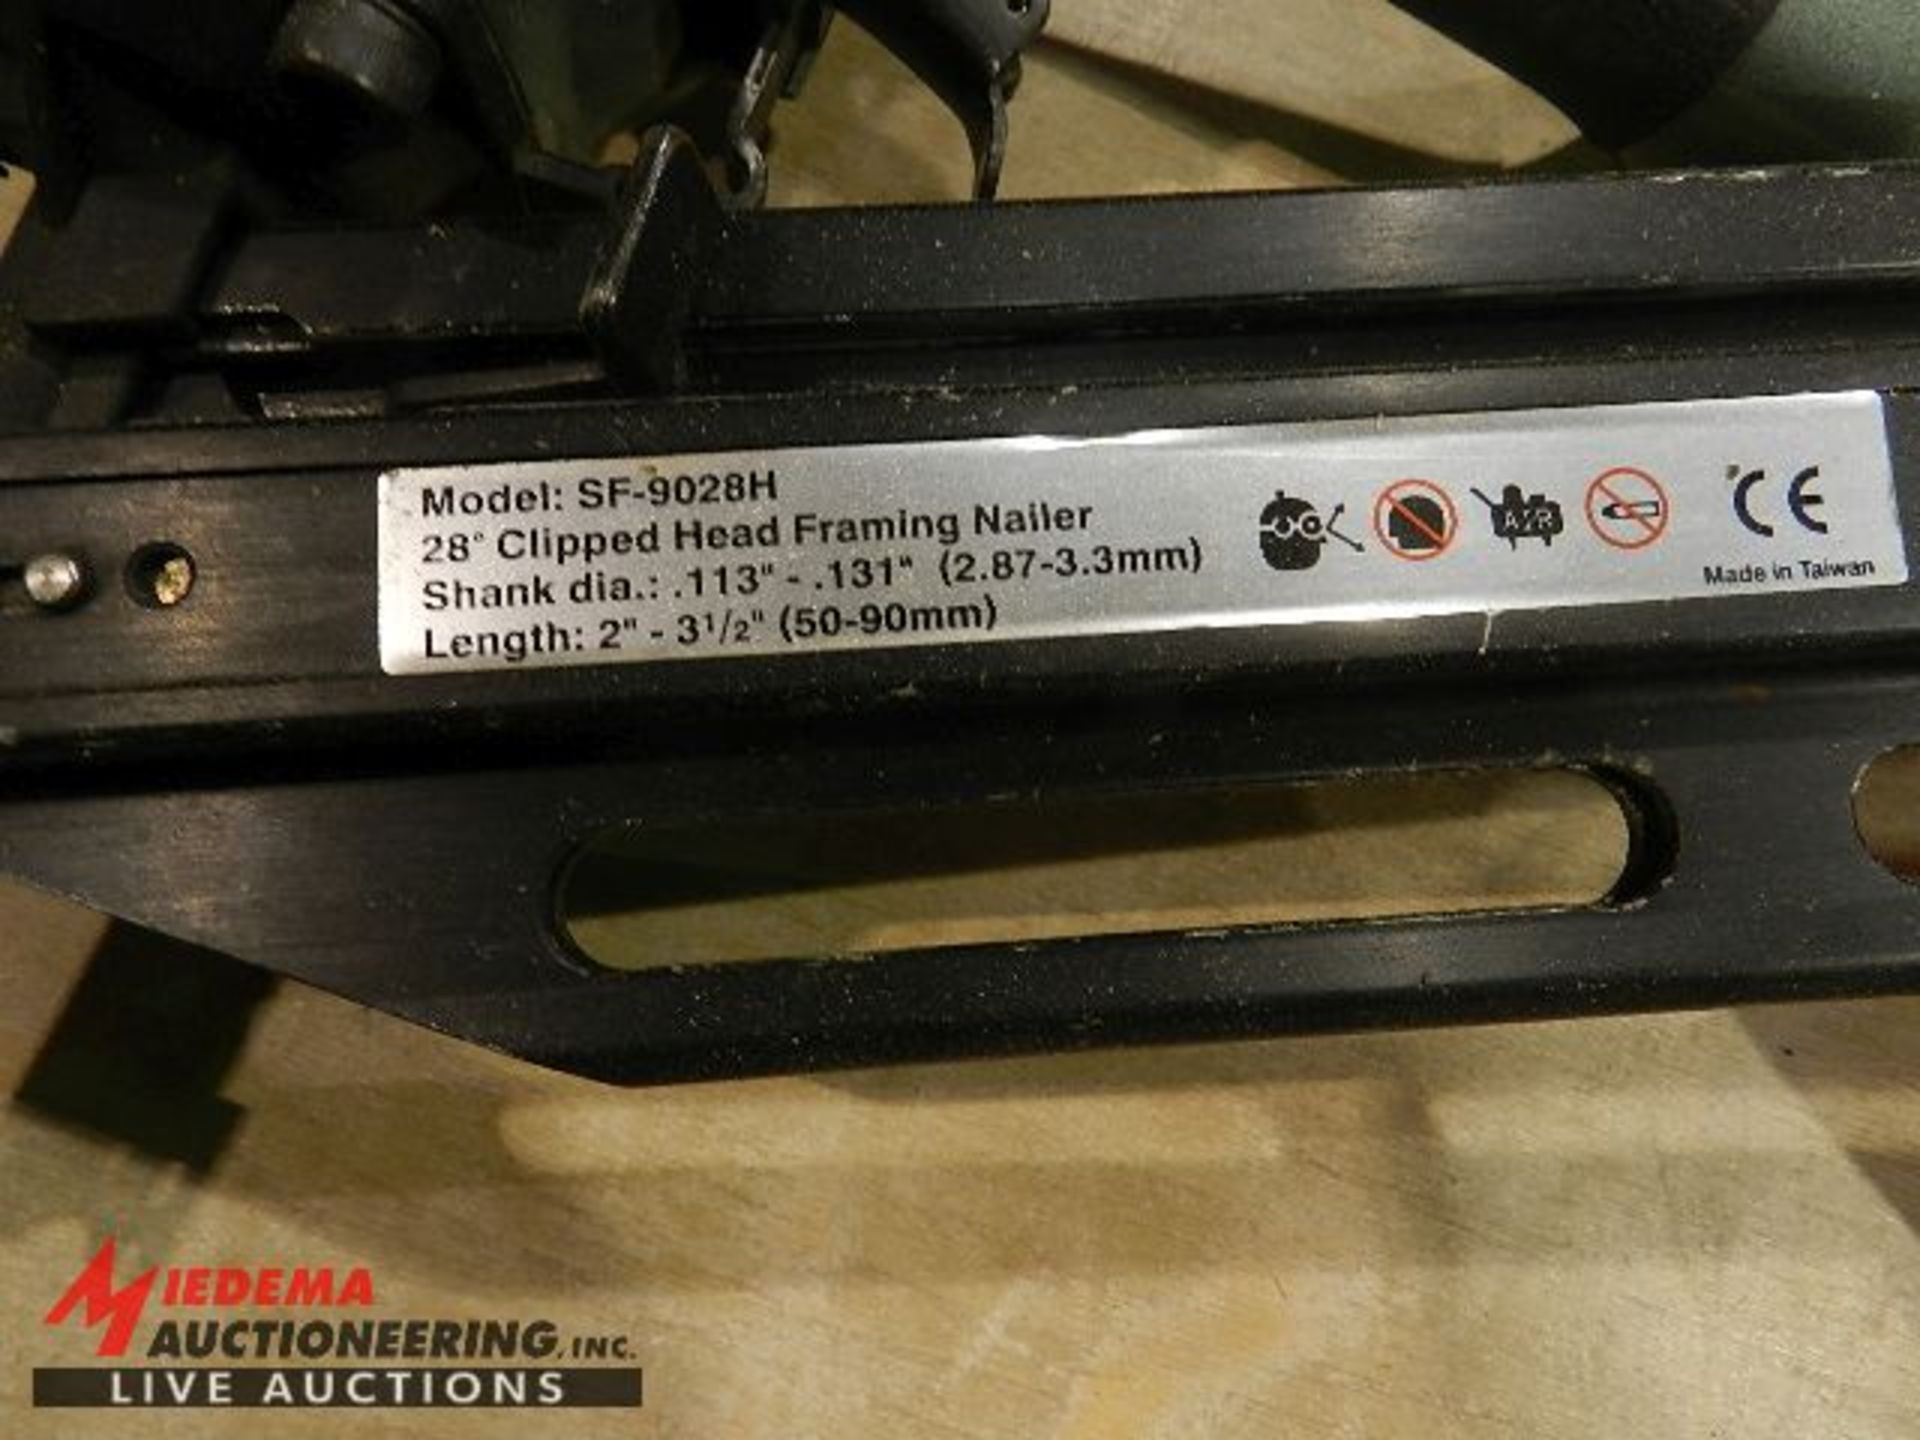 JONNESWAY SF-9028H 28° CLIPPED HEAD FRAMING NAILER, 2" TO 3 1/2" LENGTH - Image 2 of 2